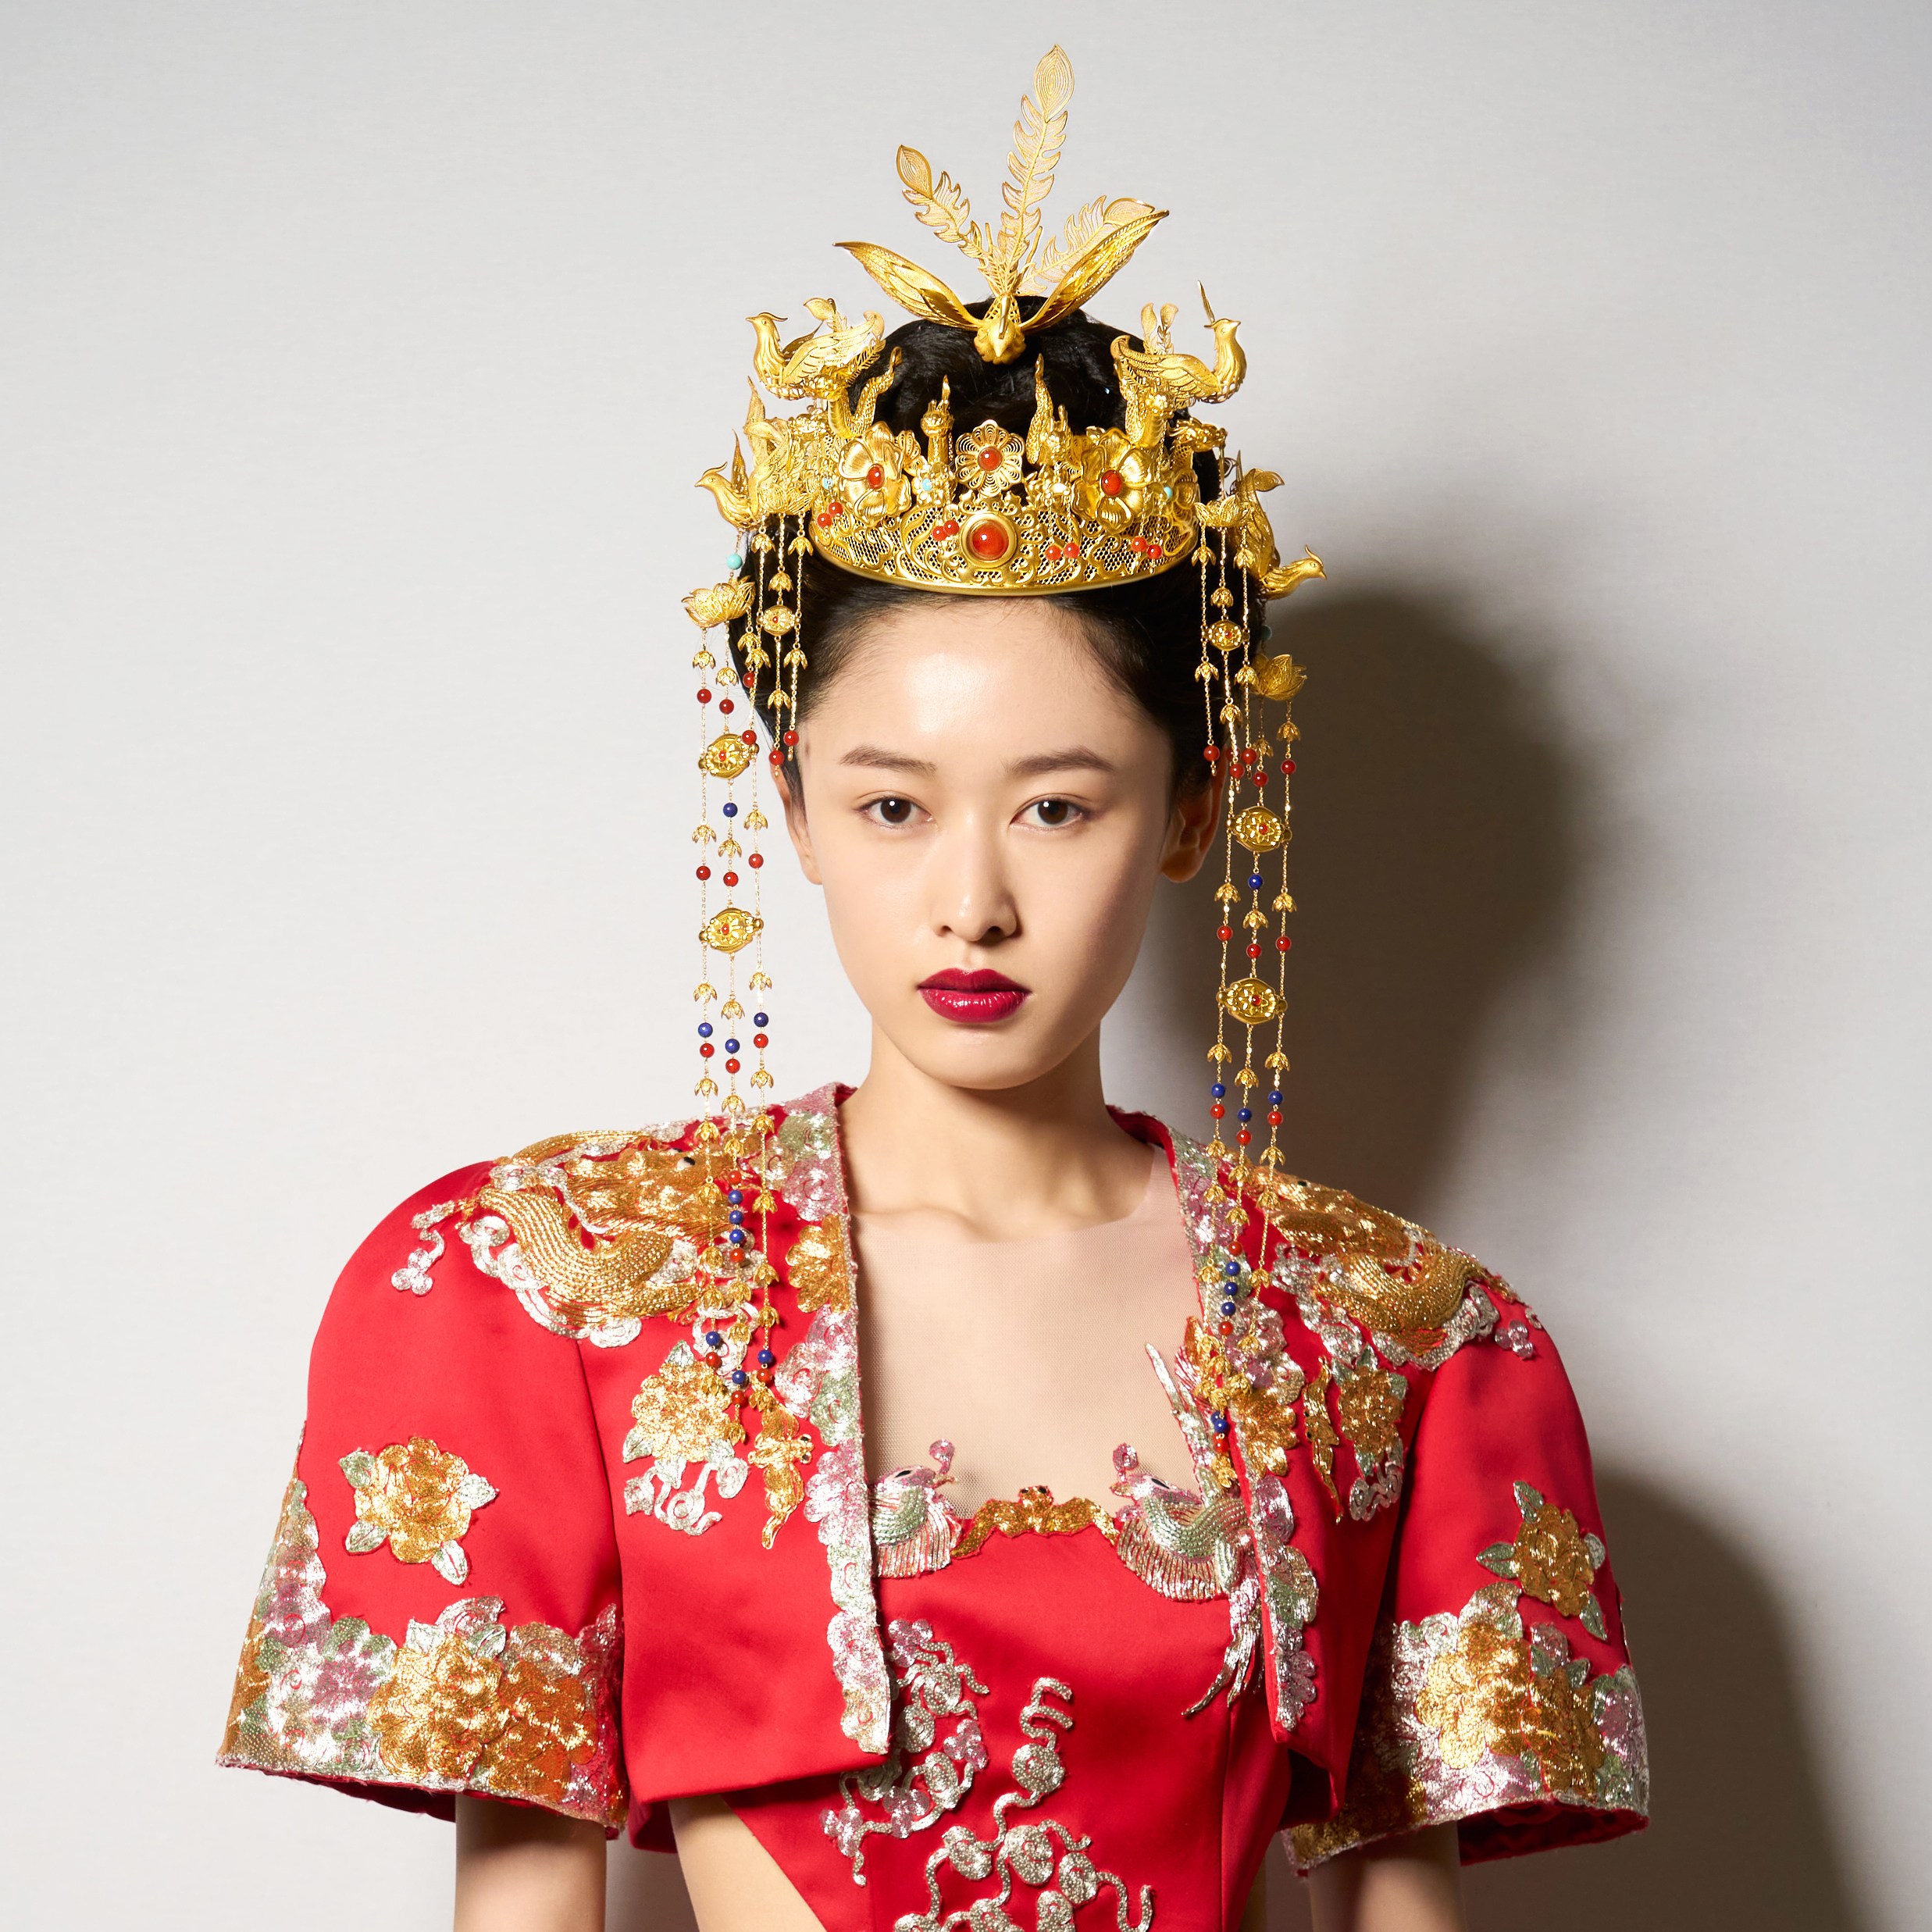 DR x VIVIENNE TAM Chinese High-end Bridal Jewelry Collection